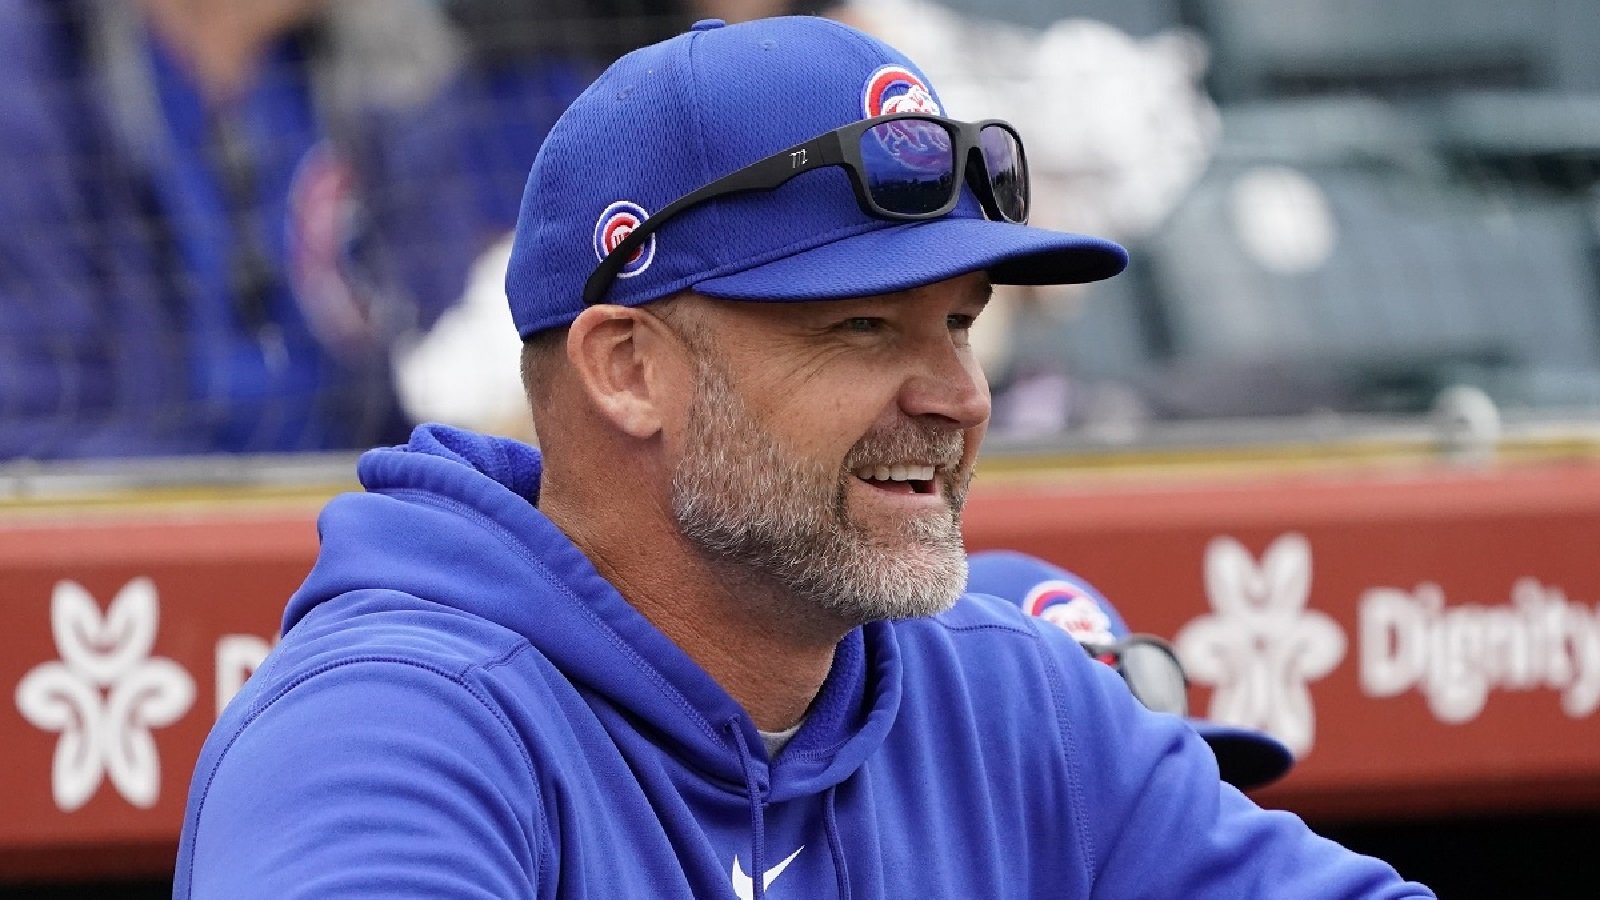 David Ross made classy move after comments about Pirates